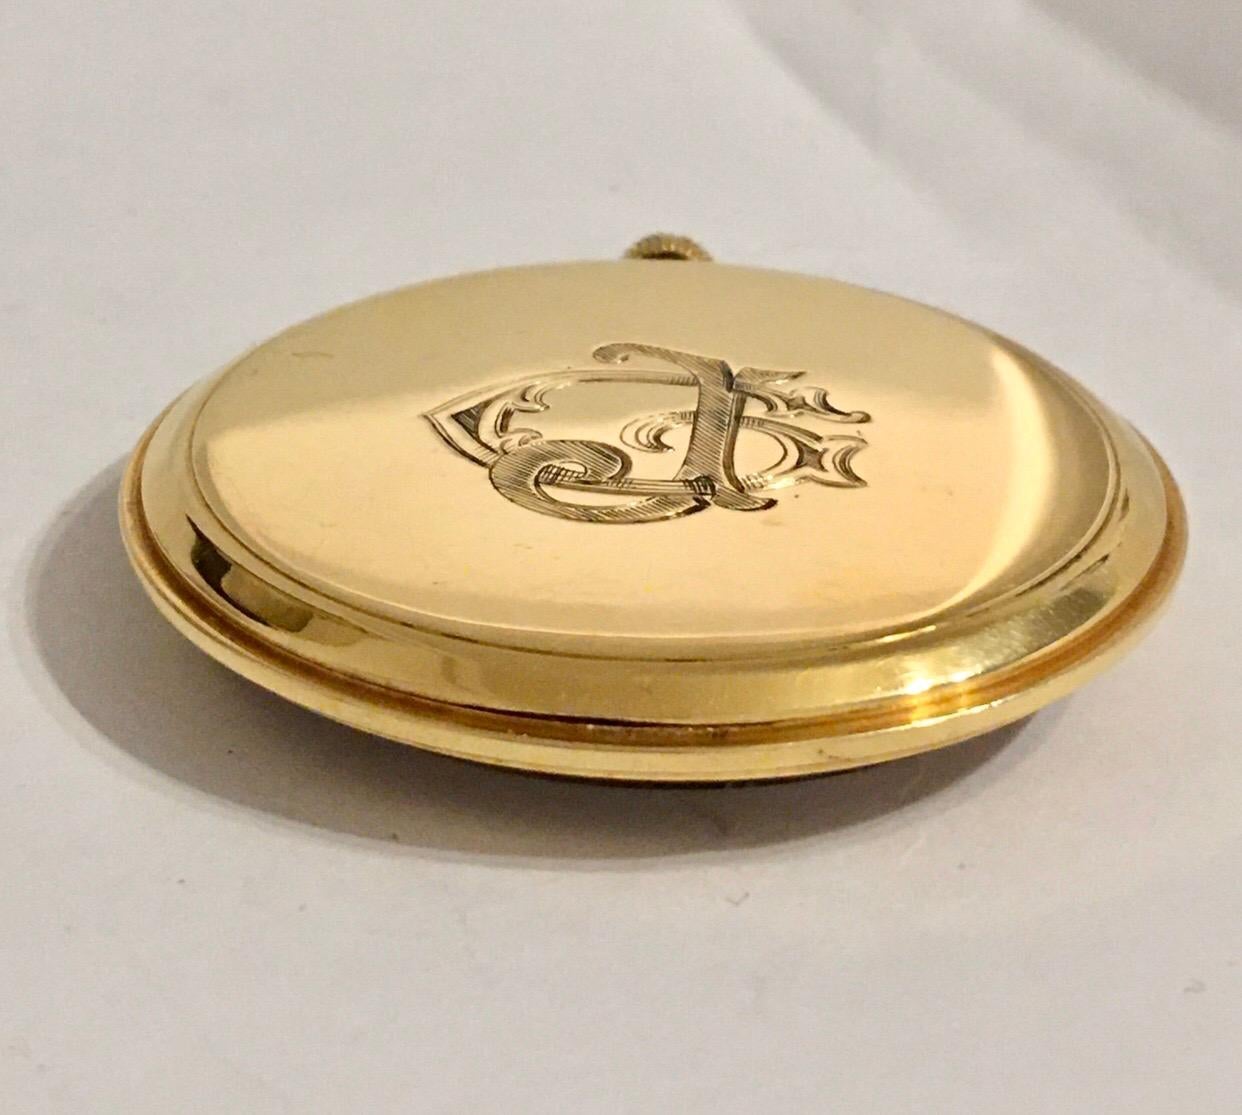 Rare 18k Gold Rolex Observatory Prince Imperial Dress Pocket Watch, circa 1950s For Sale 2